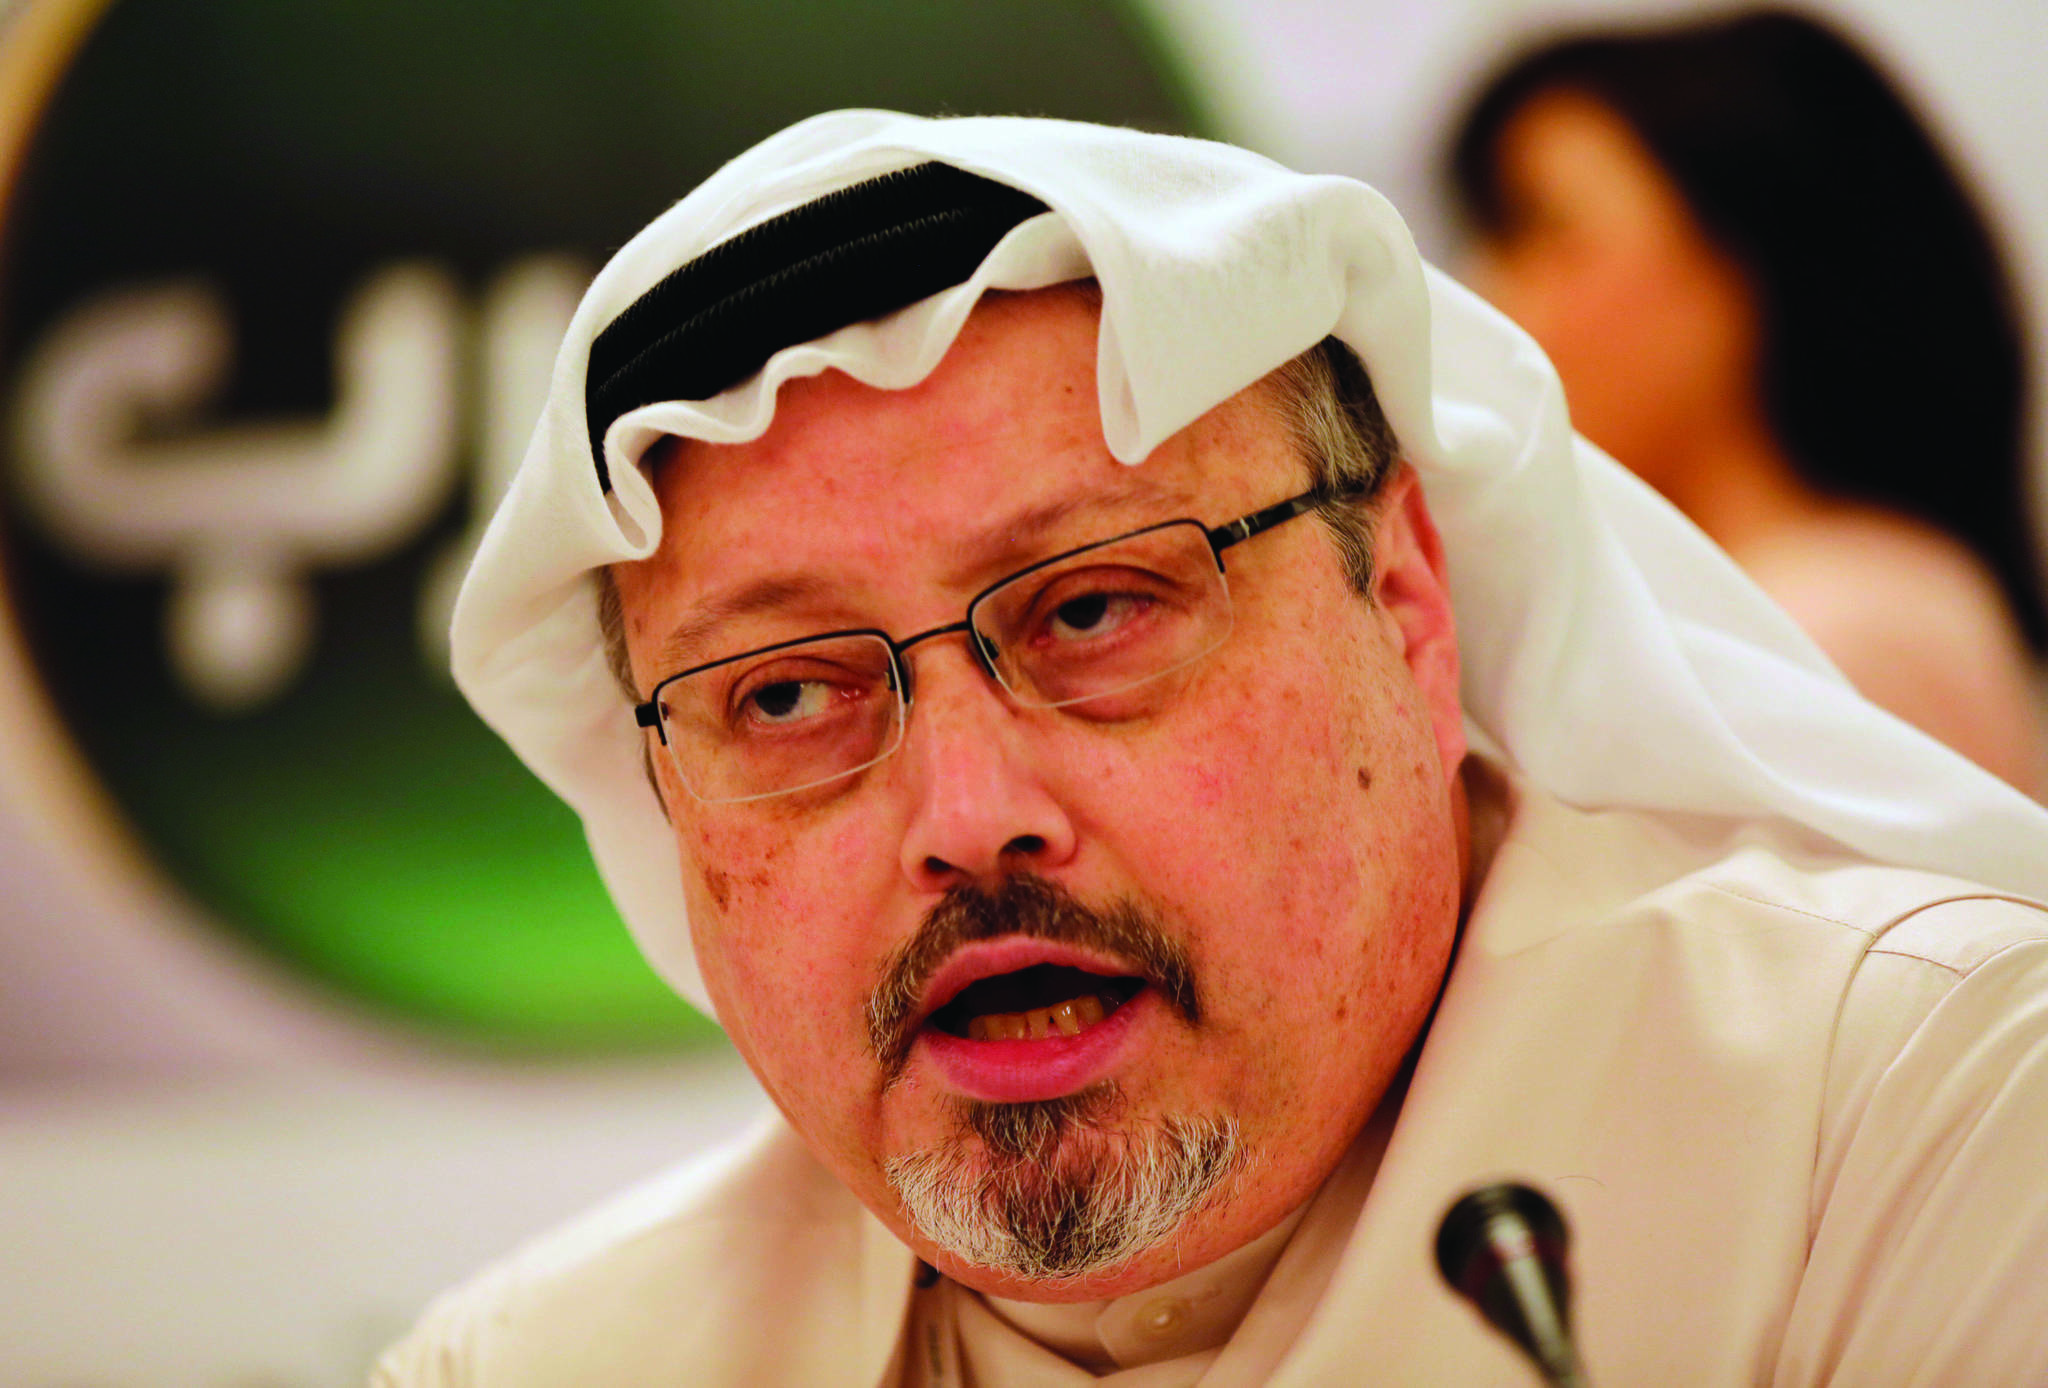 FILE - In this Dec. 15, 2014, file photo, Jamal Khashoggi, general manager of a new Arabic news channel, speaks during a news conference in Manama, Bahrain. Saudi Arabia is paying influential lobbyists, lawyers and public relations experts nearly $6 million a year to engage U.S. officials and promote the Middle East nation, even after several firms cut ties with the kingdom following the disappearance of journalist Khashoggi. (AP Photo/Hasan Jamali, File)